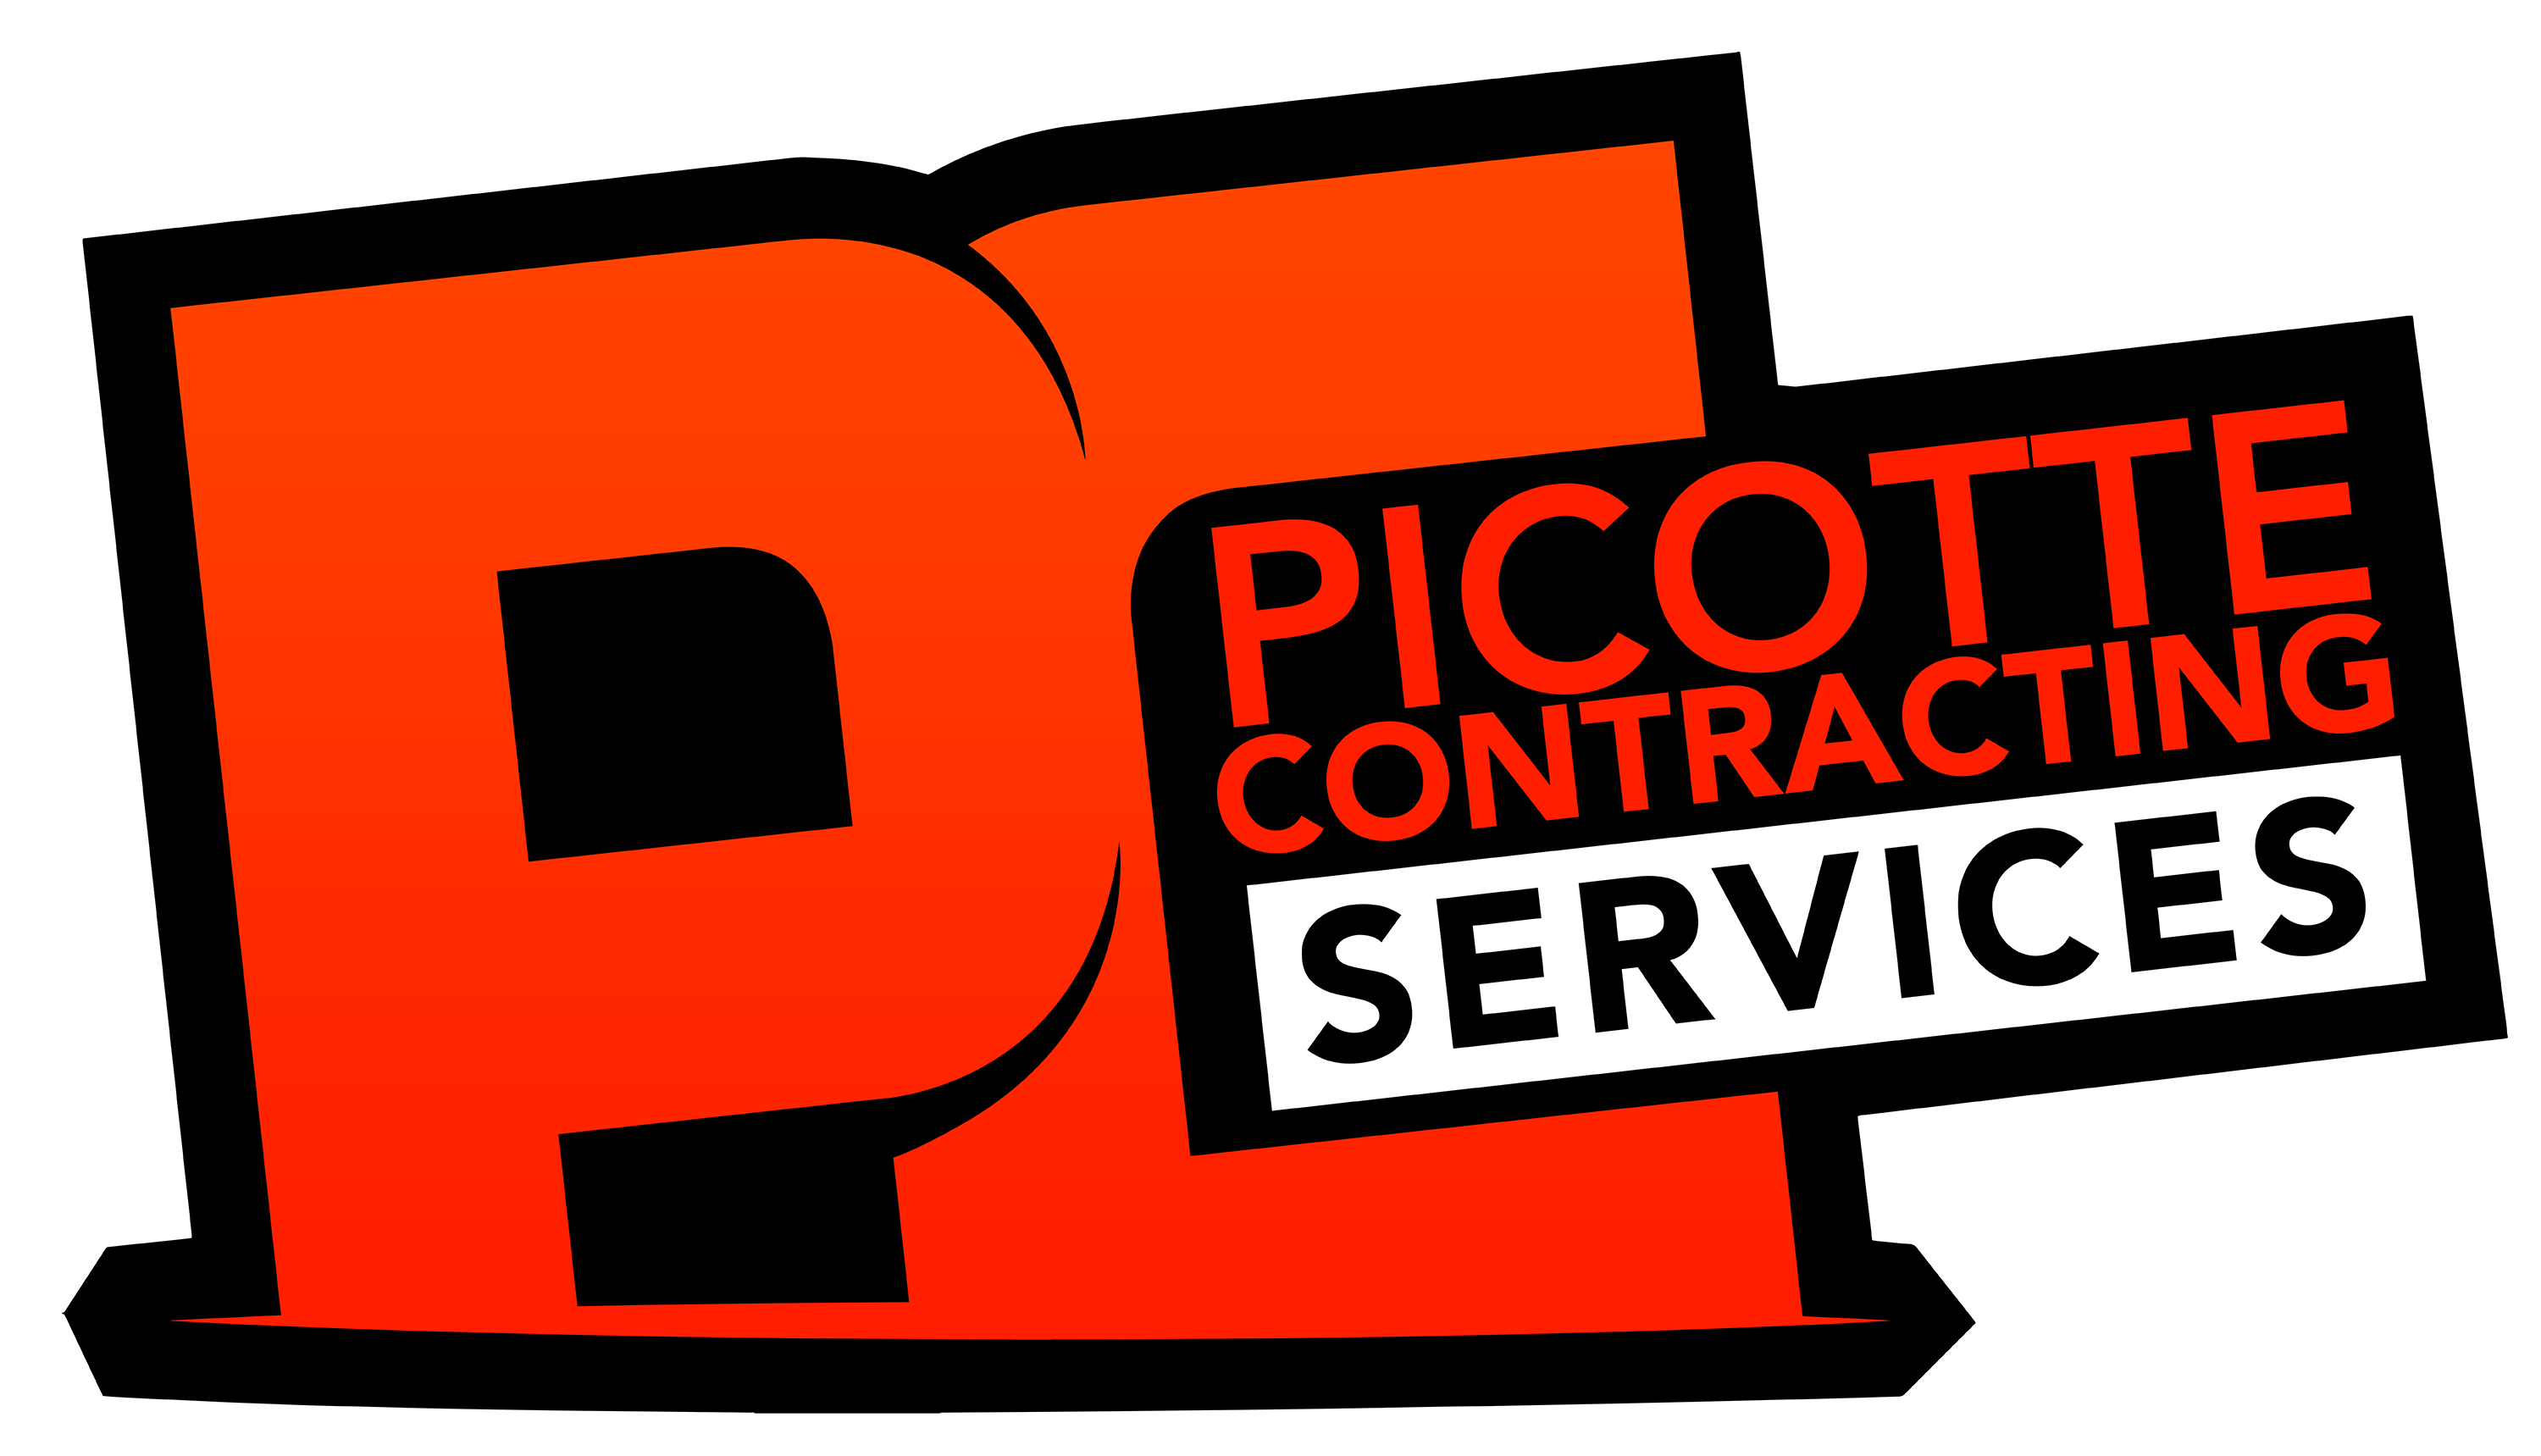 Picotte Contracting Services 